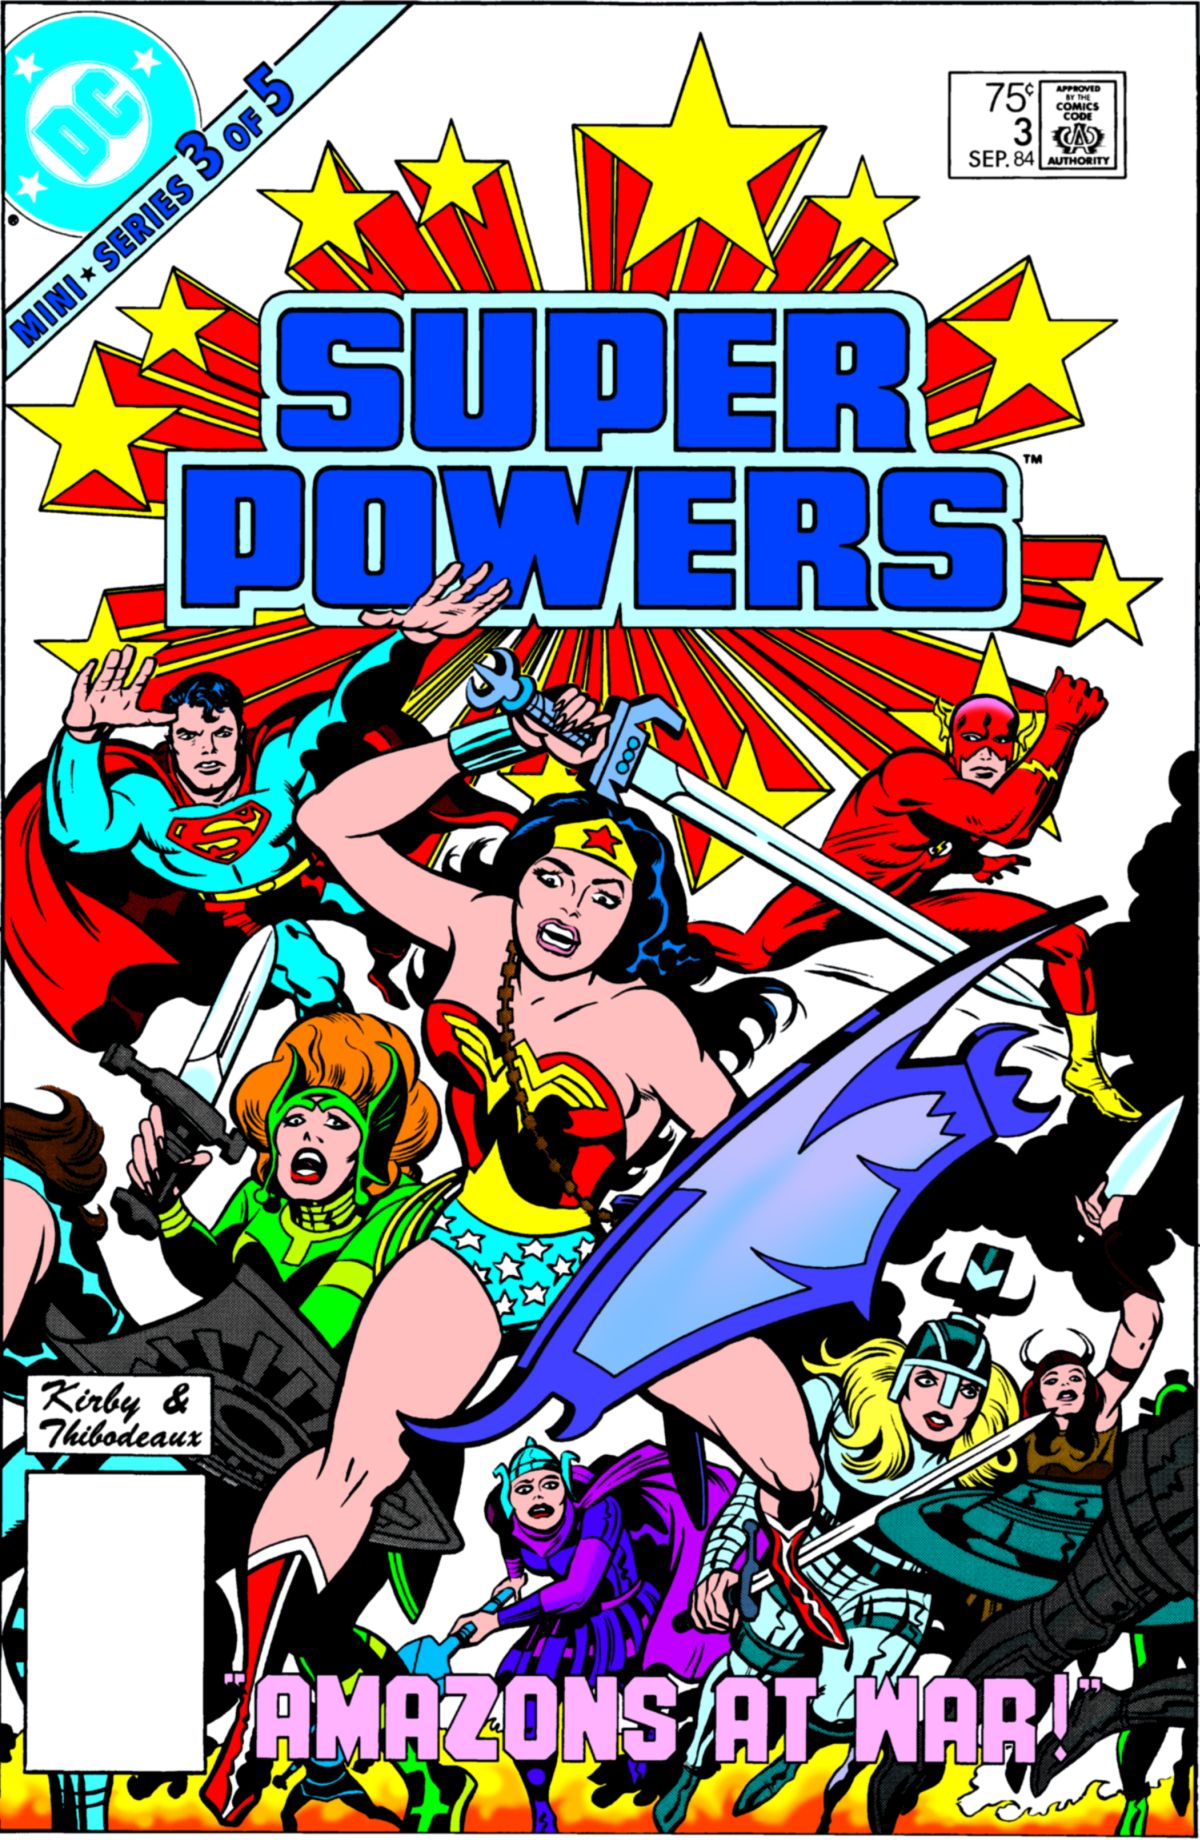 SUPER POWERS BY JACK KIRBY TP